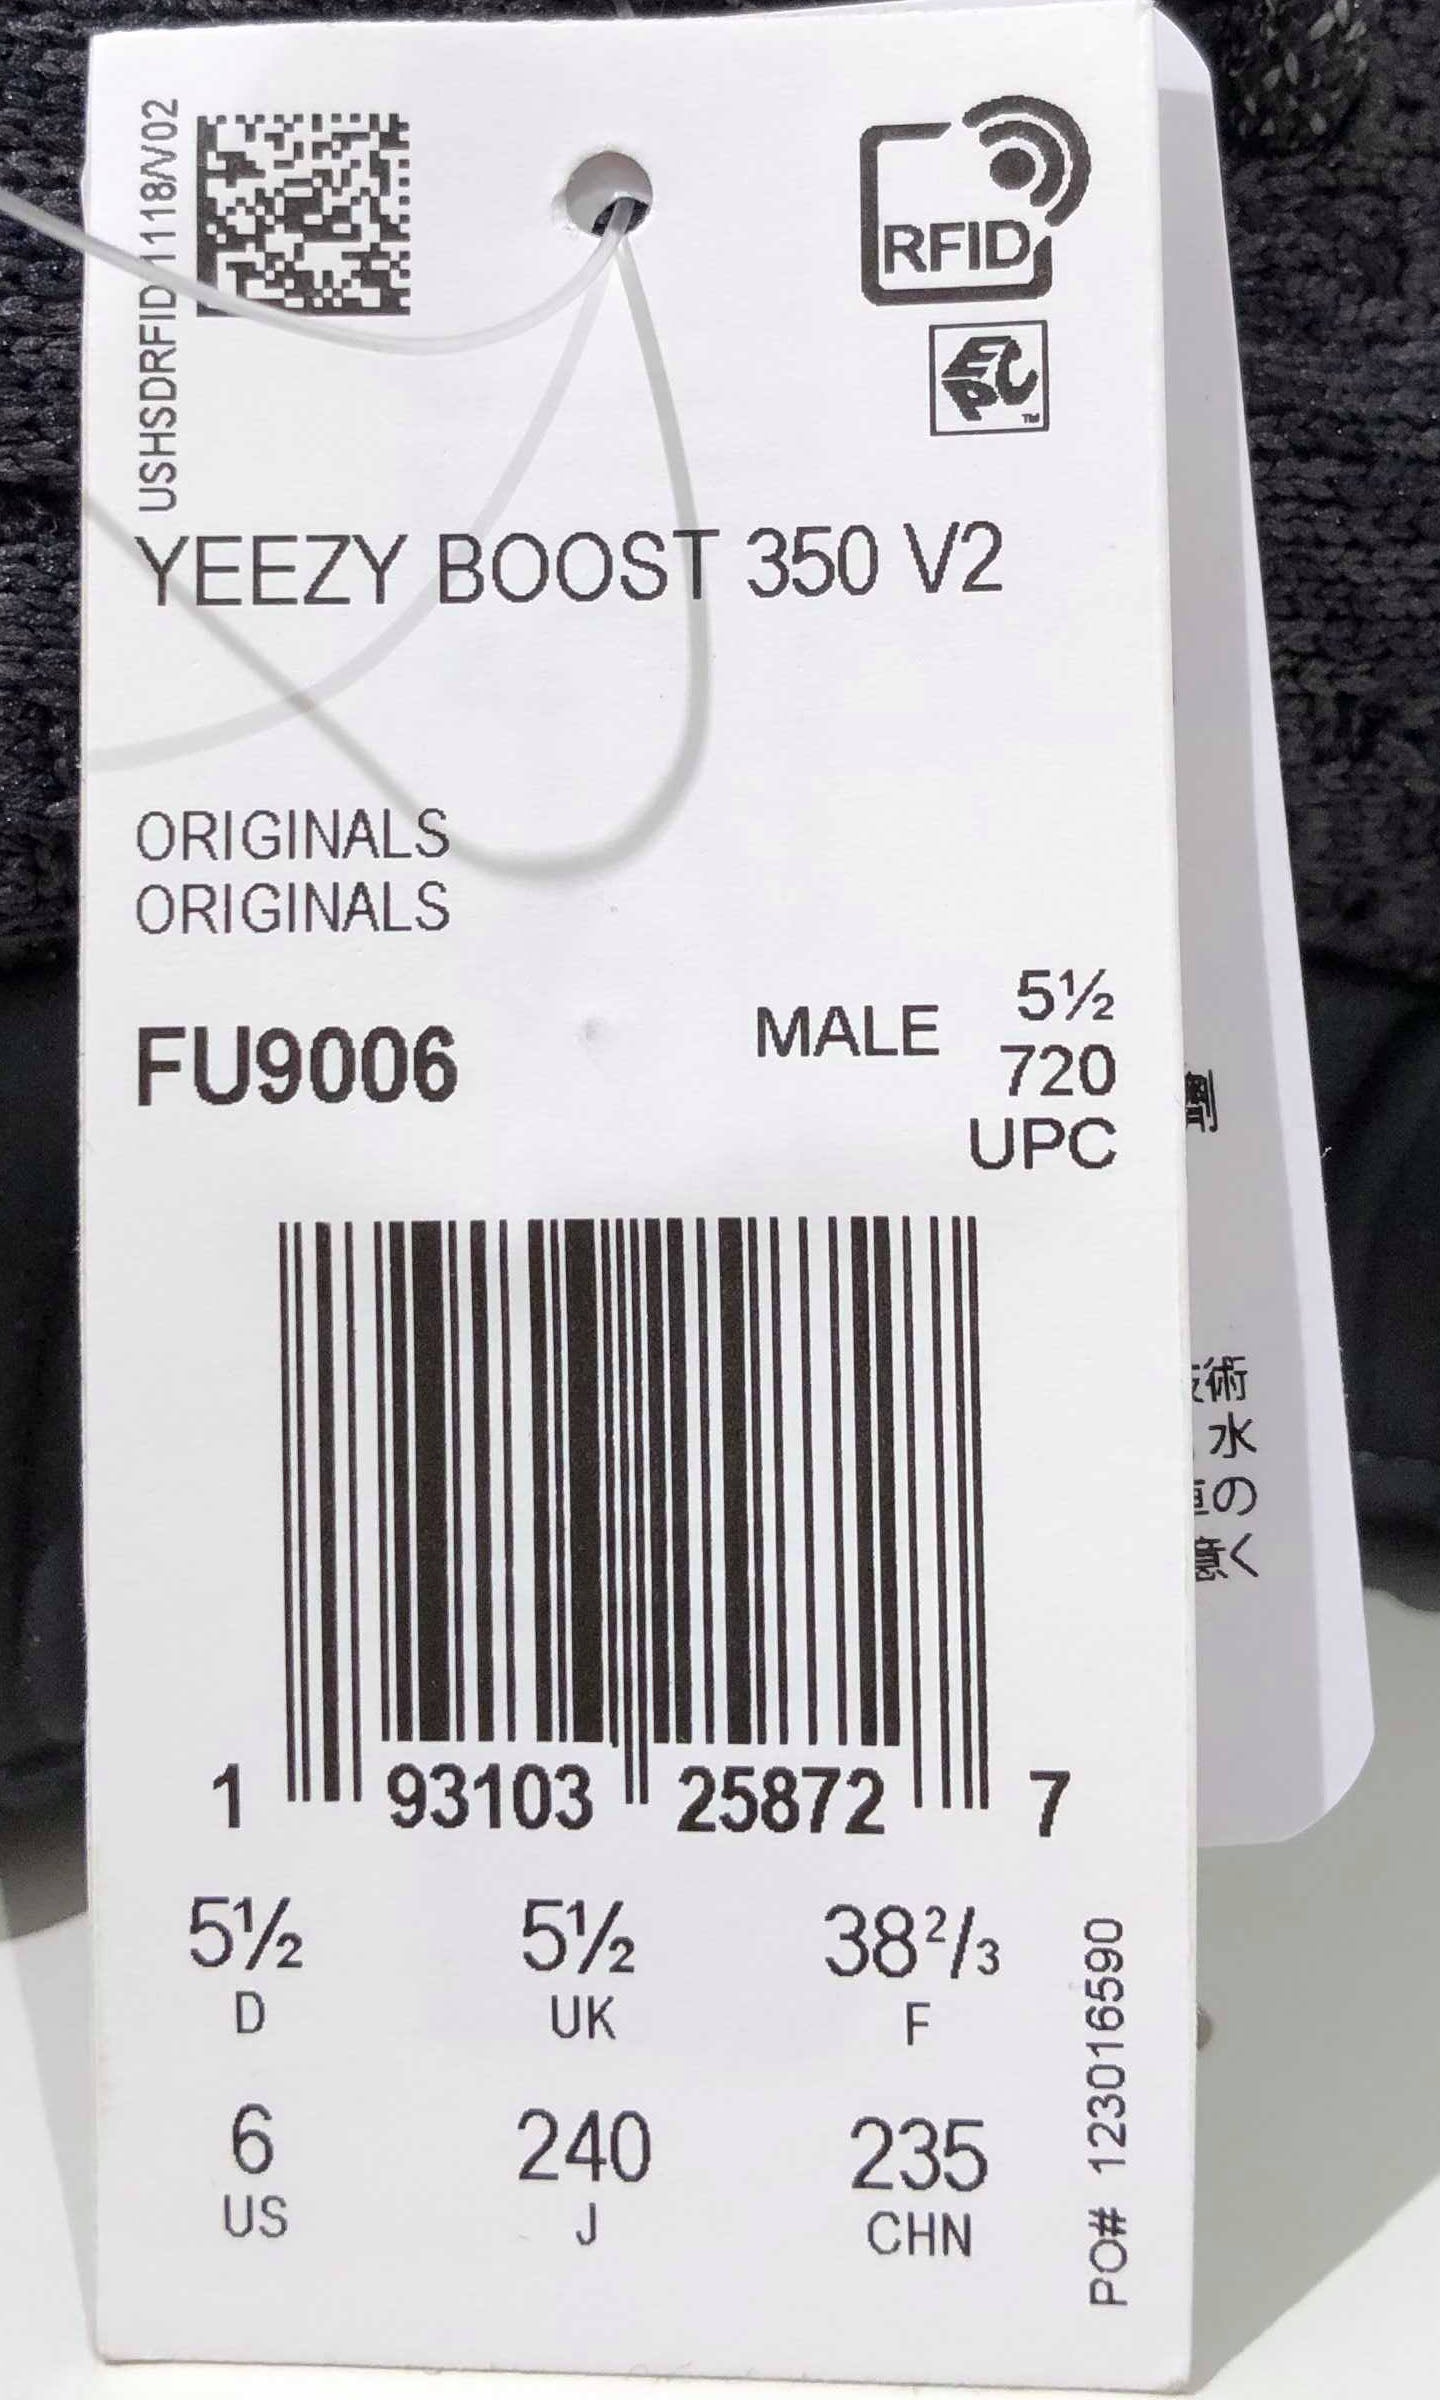 adidas + Kanye West announce the Yeezy Boost 350 v2 cloud